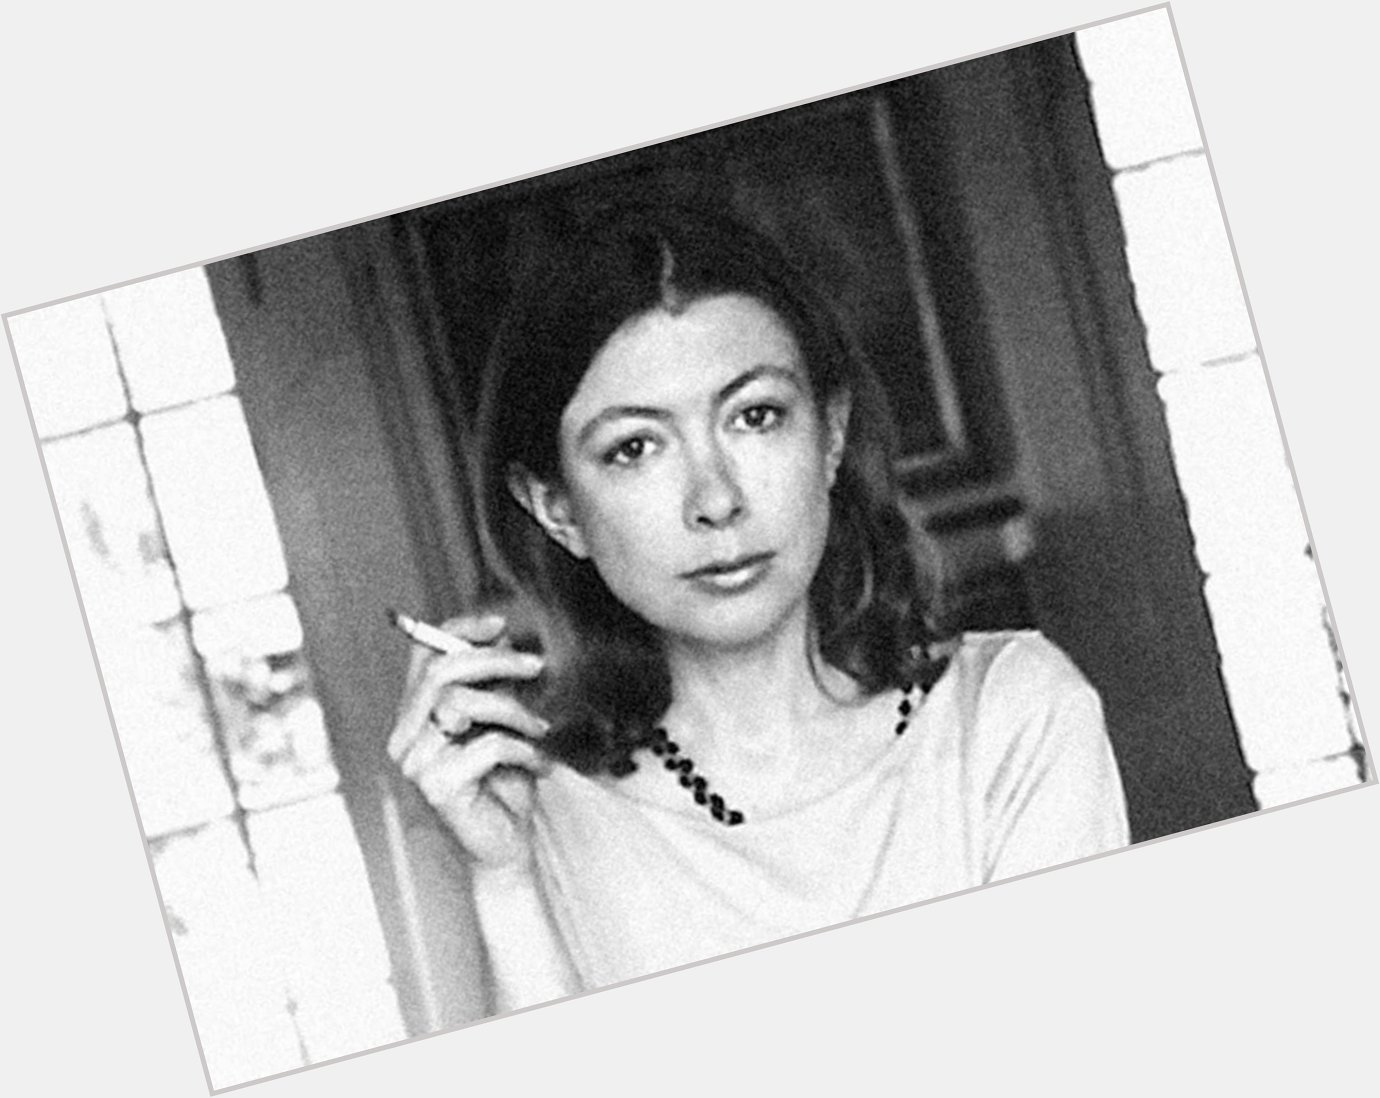  I just can t get that monster out of my mind. Happy Birthday, Joan Didion. 

Thanks for the words. 